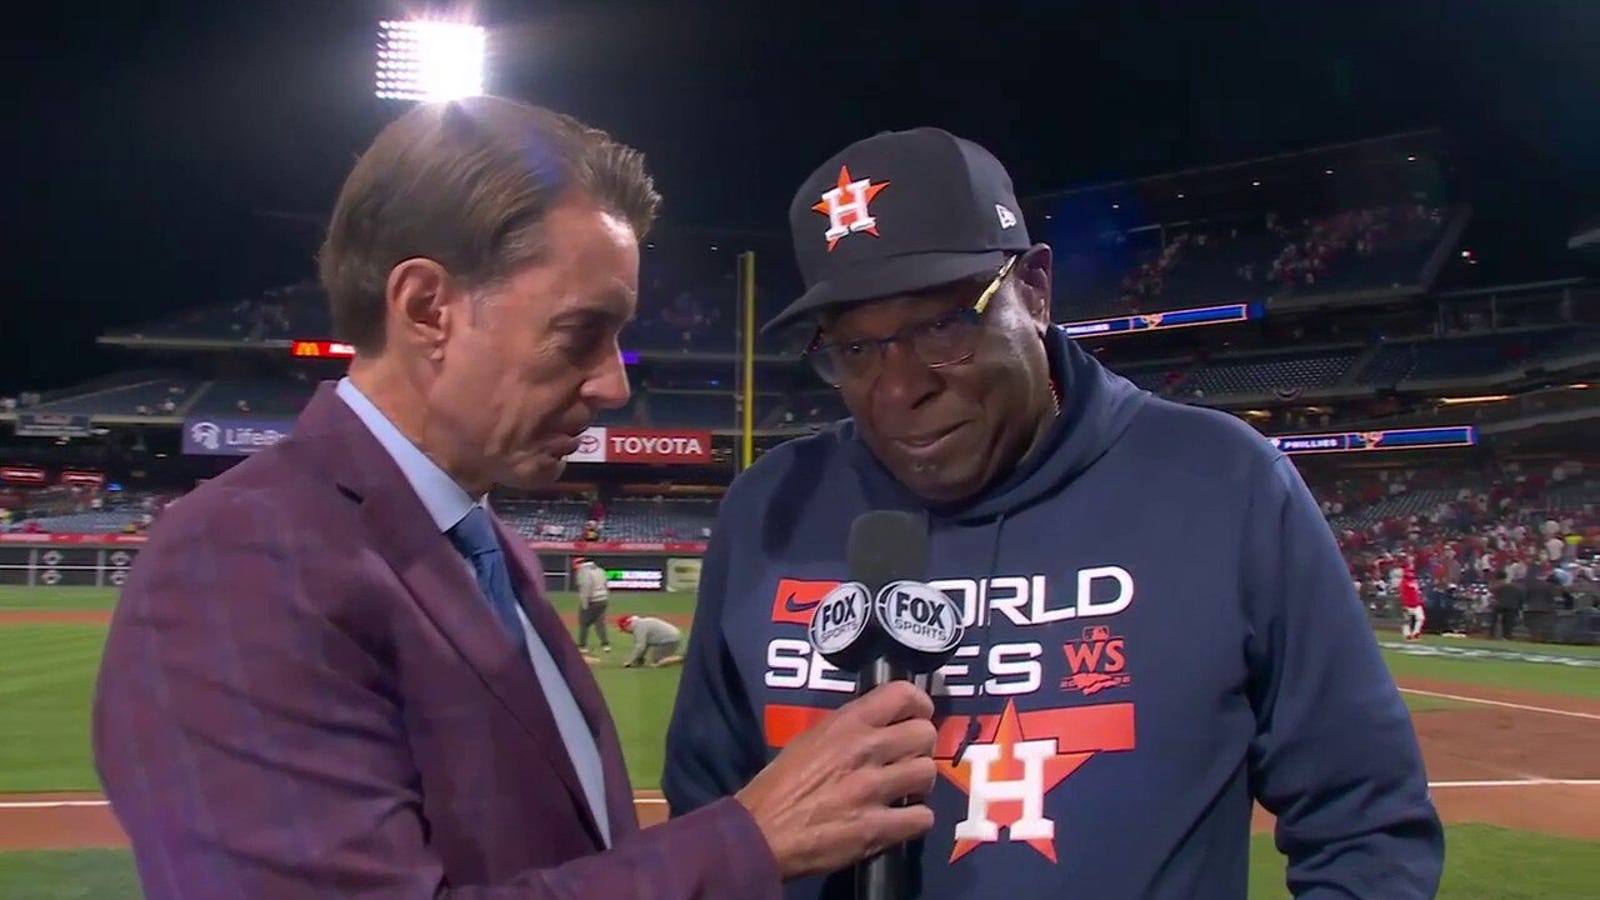 Dusty Baker on managing a no-hitter